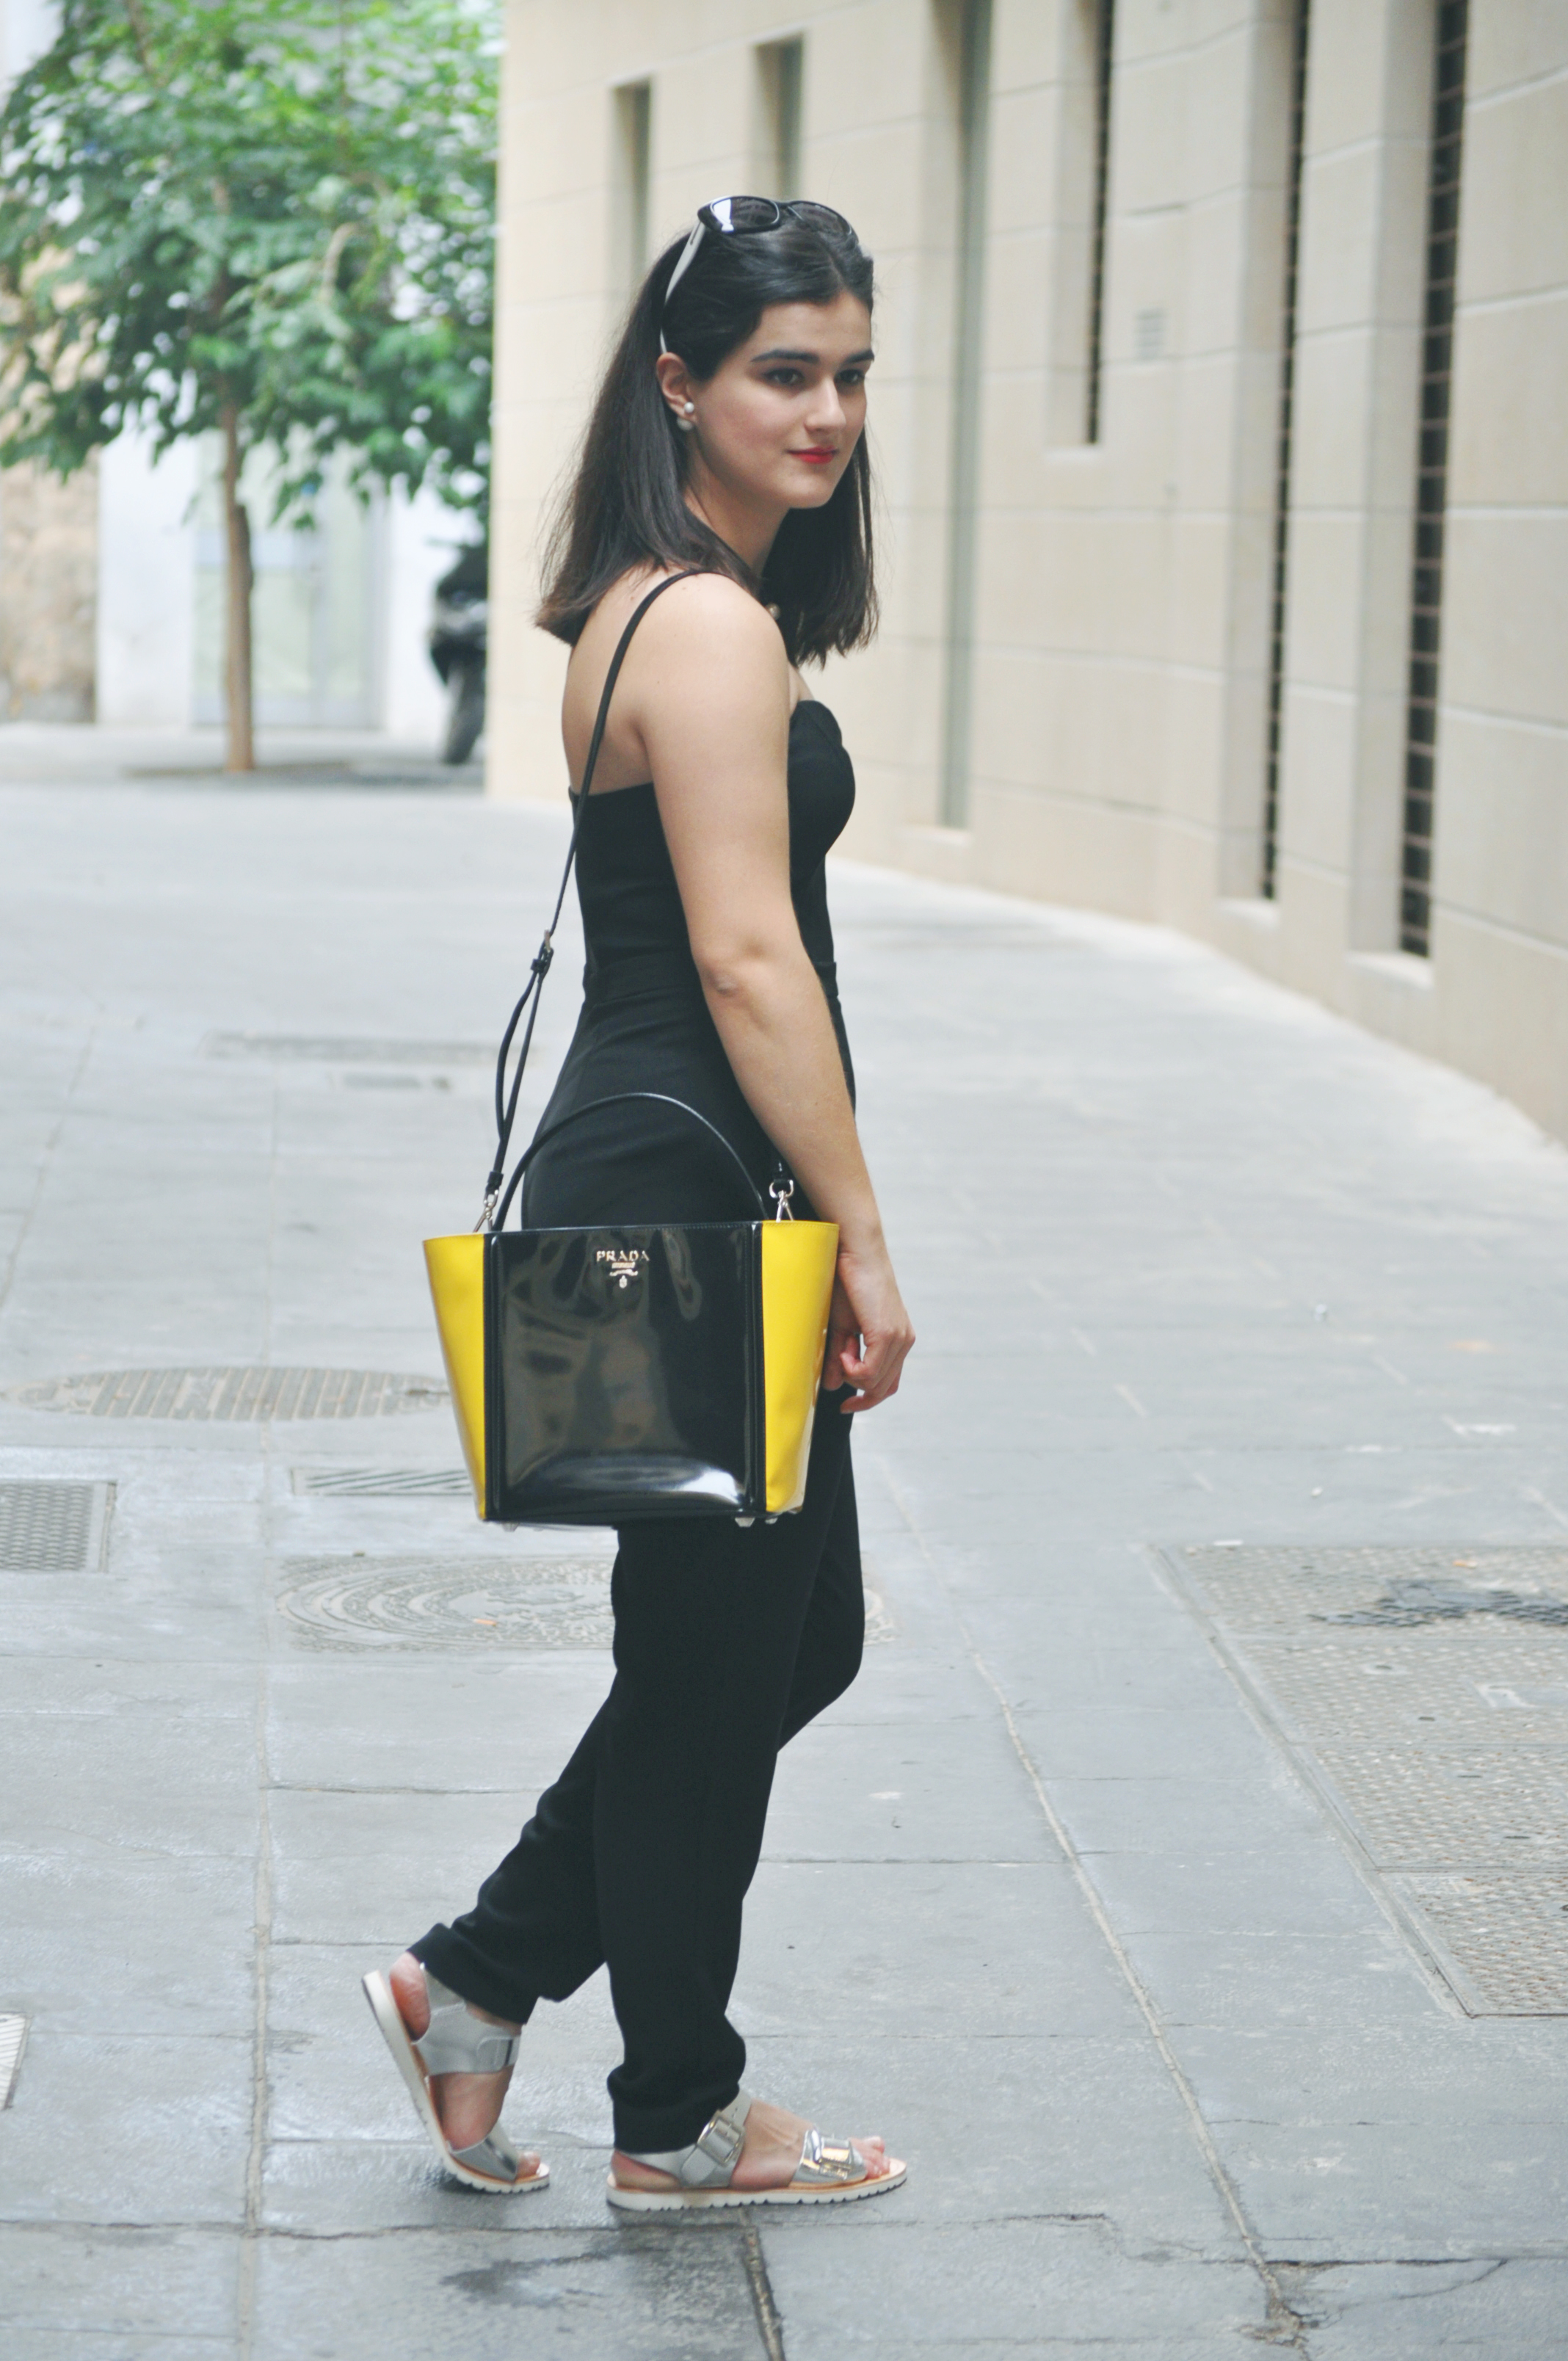 something fashion blogger, valenciablogger, ugly shoes how to style black jumpsuit, outfit inspiration total black prada, short hair brunette sweetheart spazzolo bag statement, valencia moda blogger